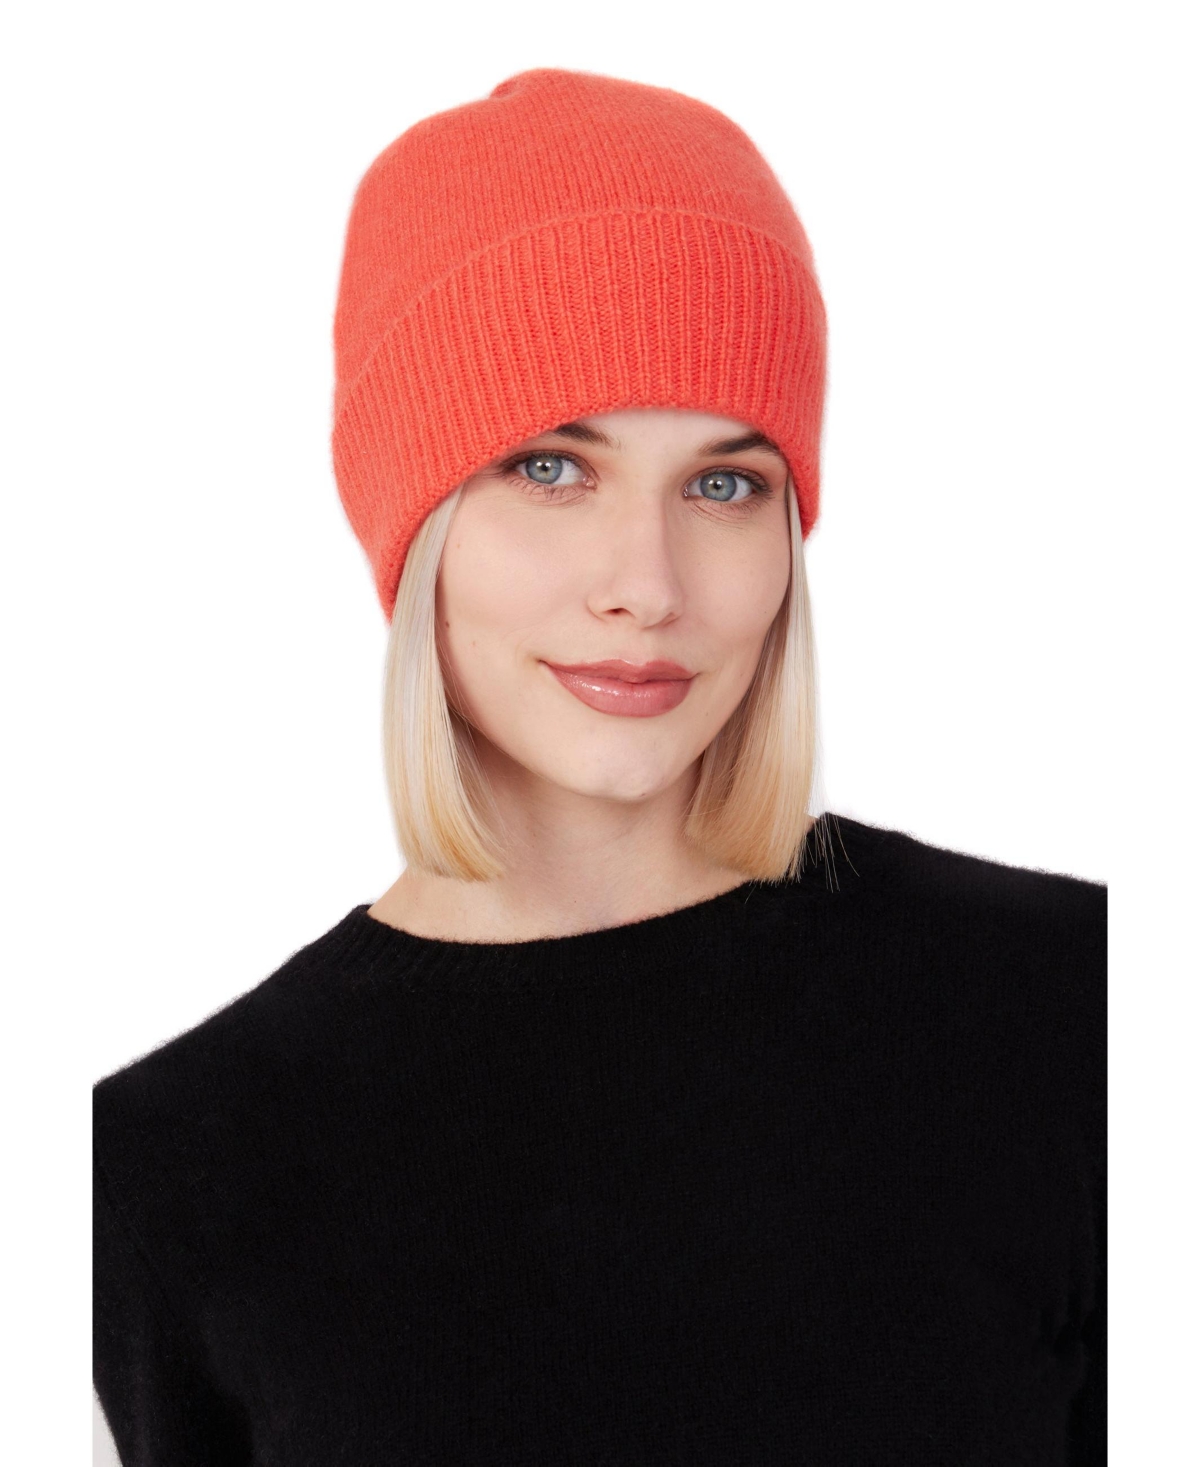 100% Pure Cashmere Women's Ribbed Cuff Beanie - Chocolate Brown